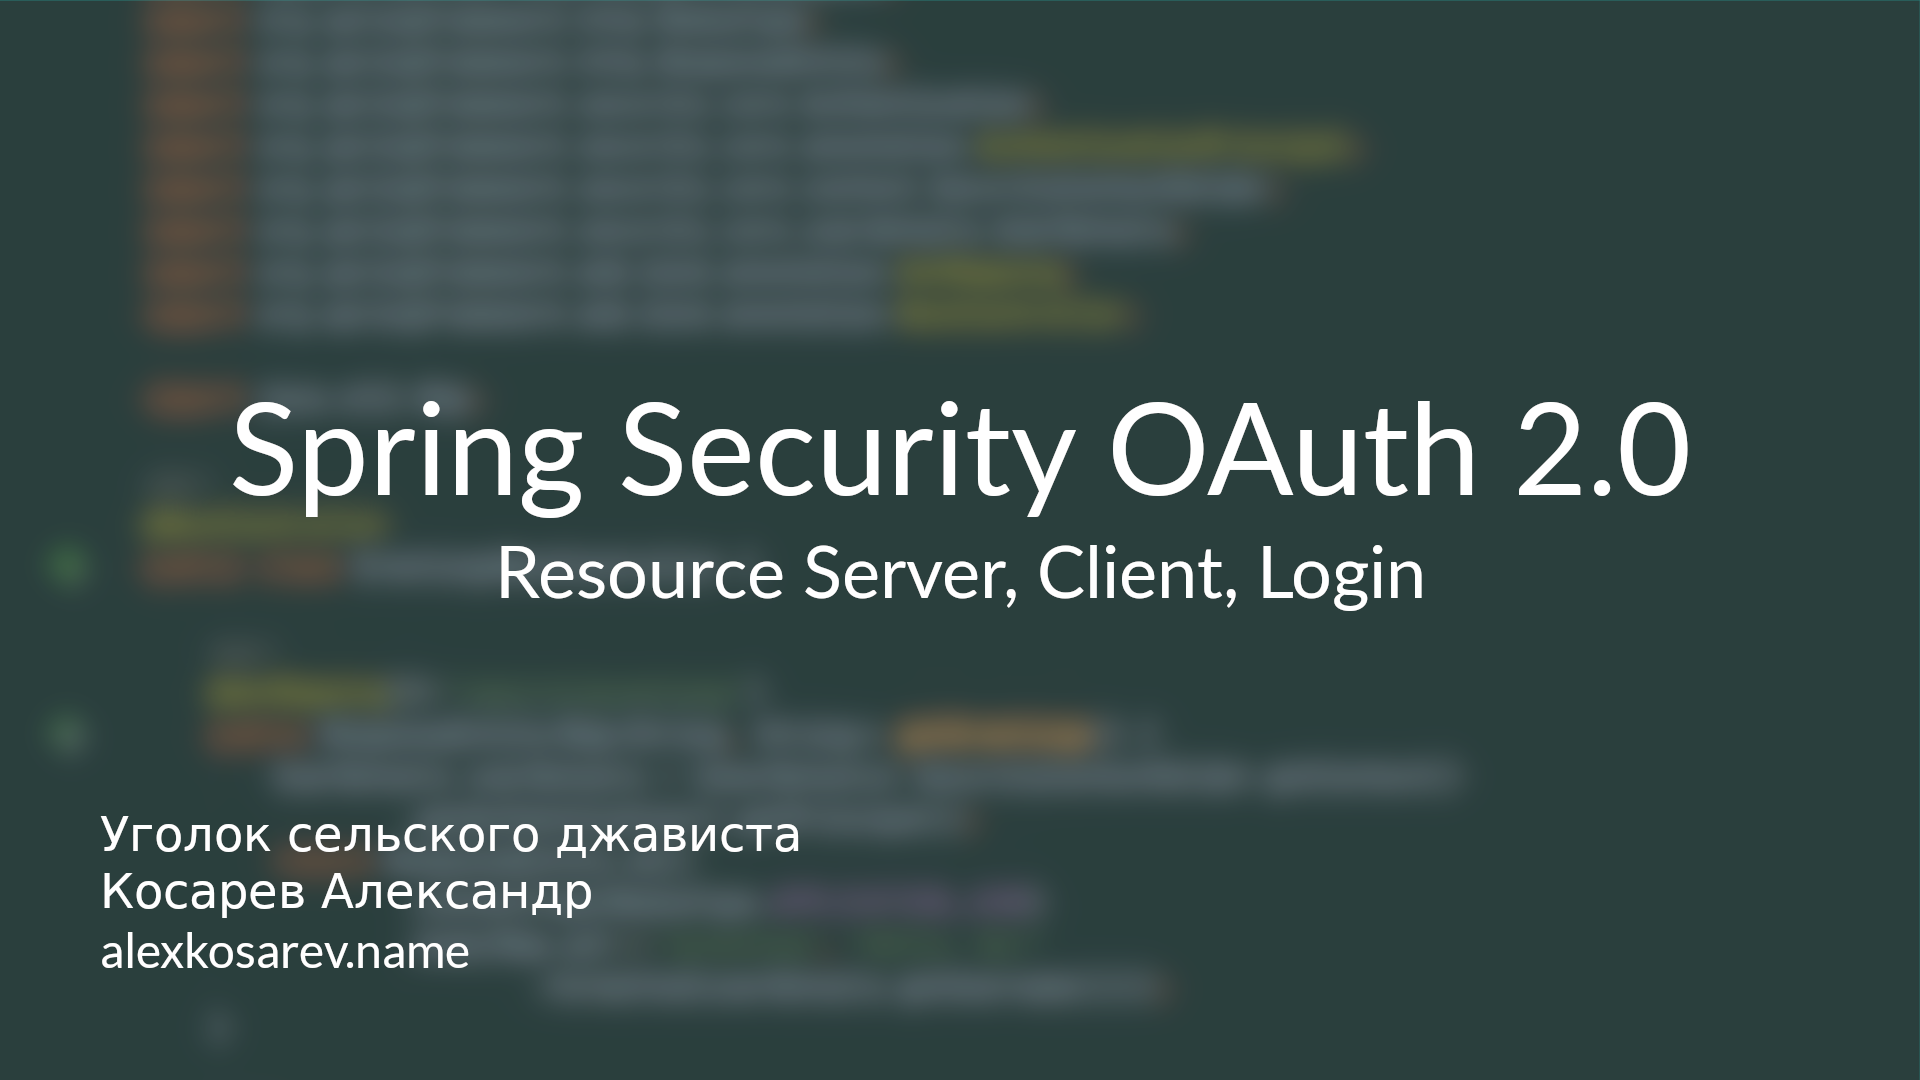 Client, Resource Server, Login - Spring Security OAuth 2.0